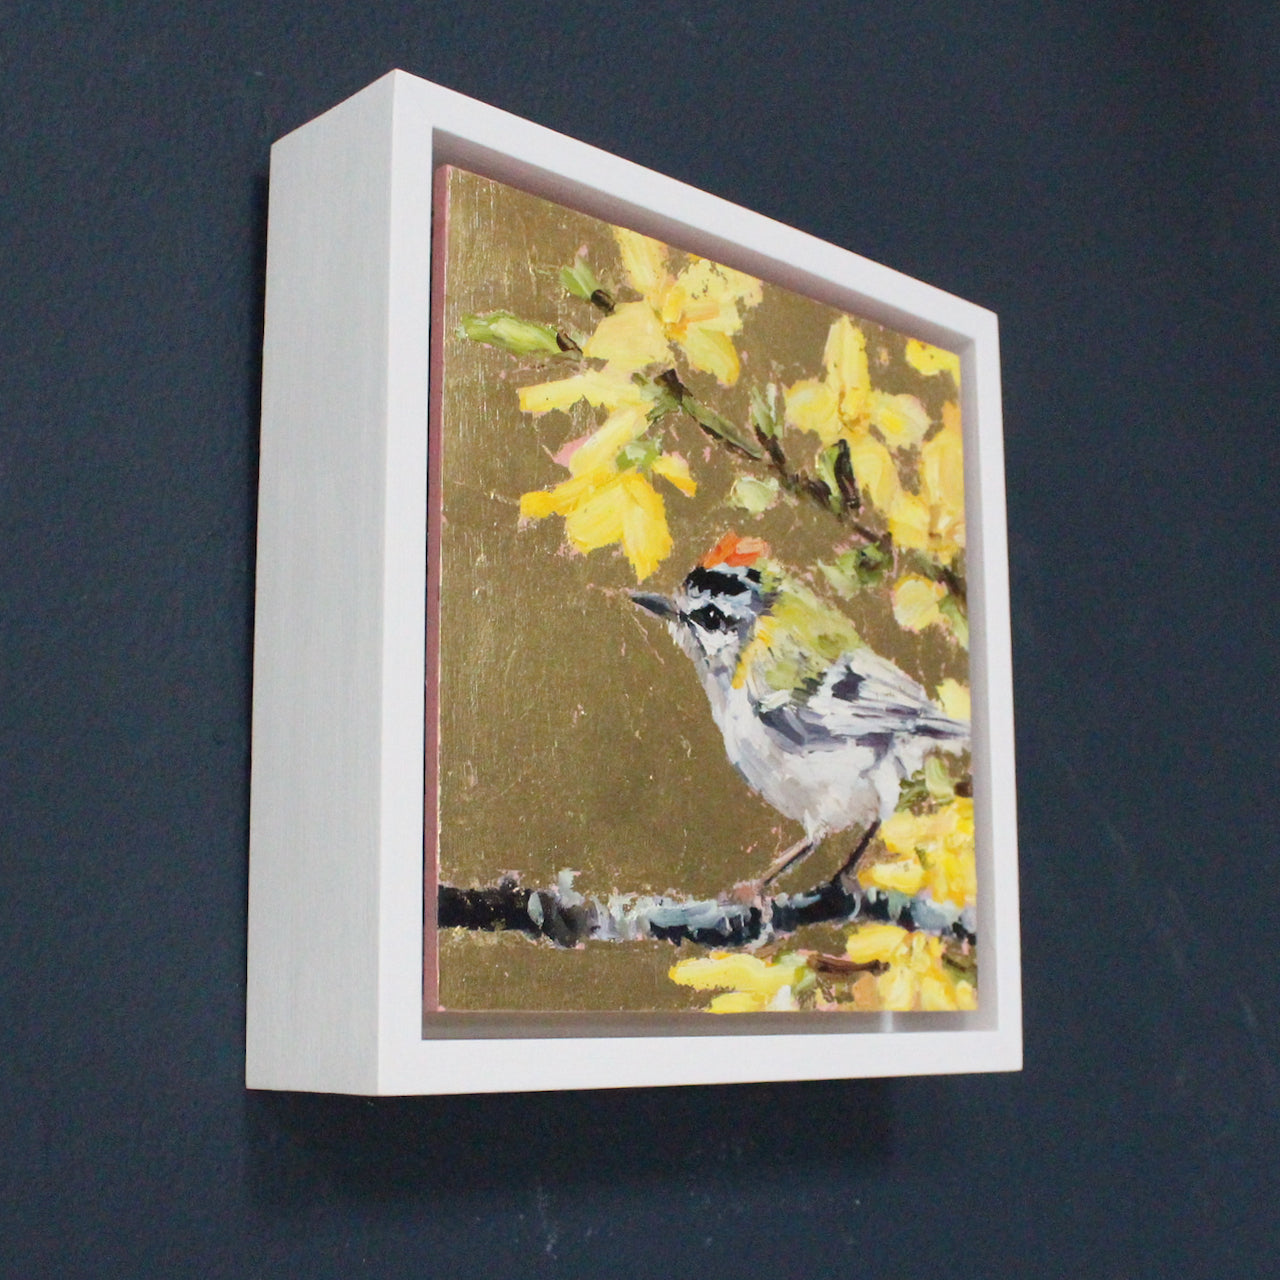 Framed square painting with gold lustre background, firecrest sitting on branch in foregound and yellow/cream blossom by artist Jill Hudson